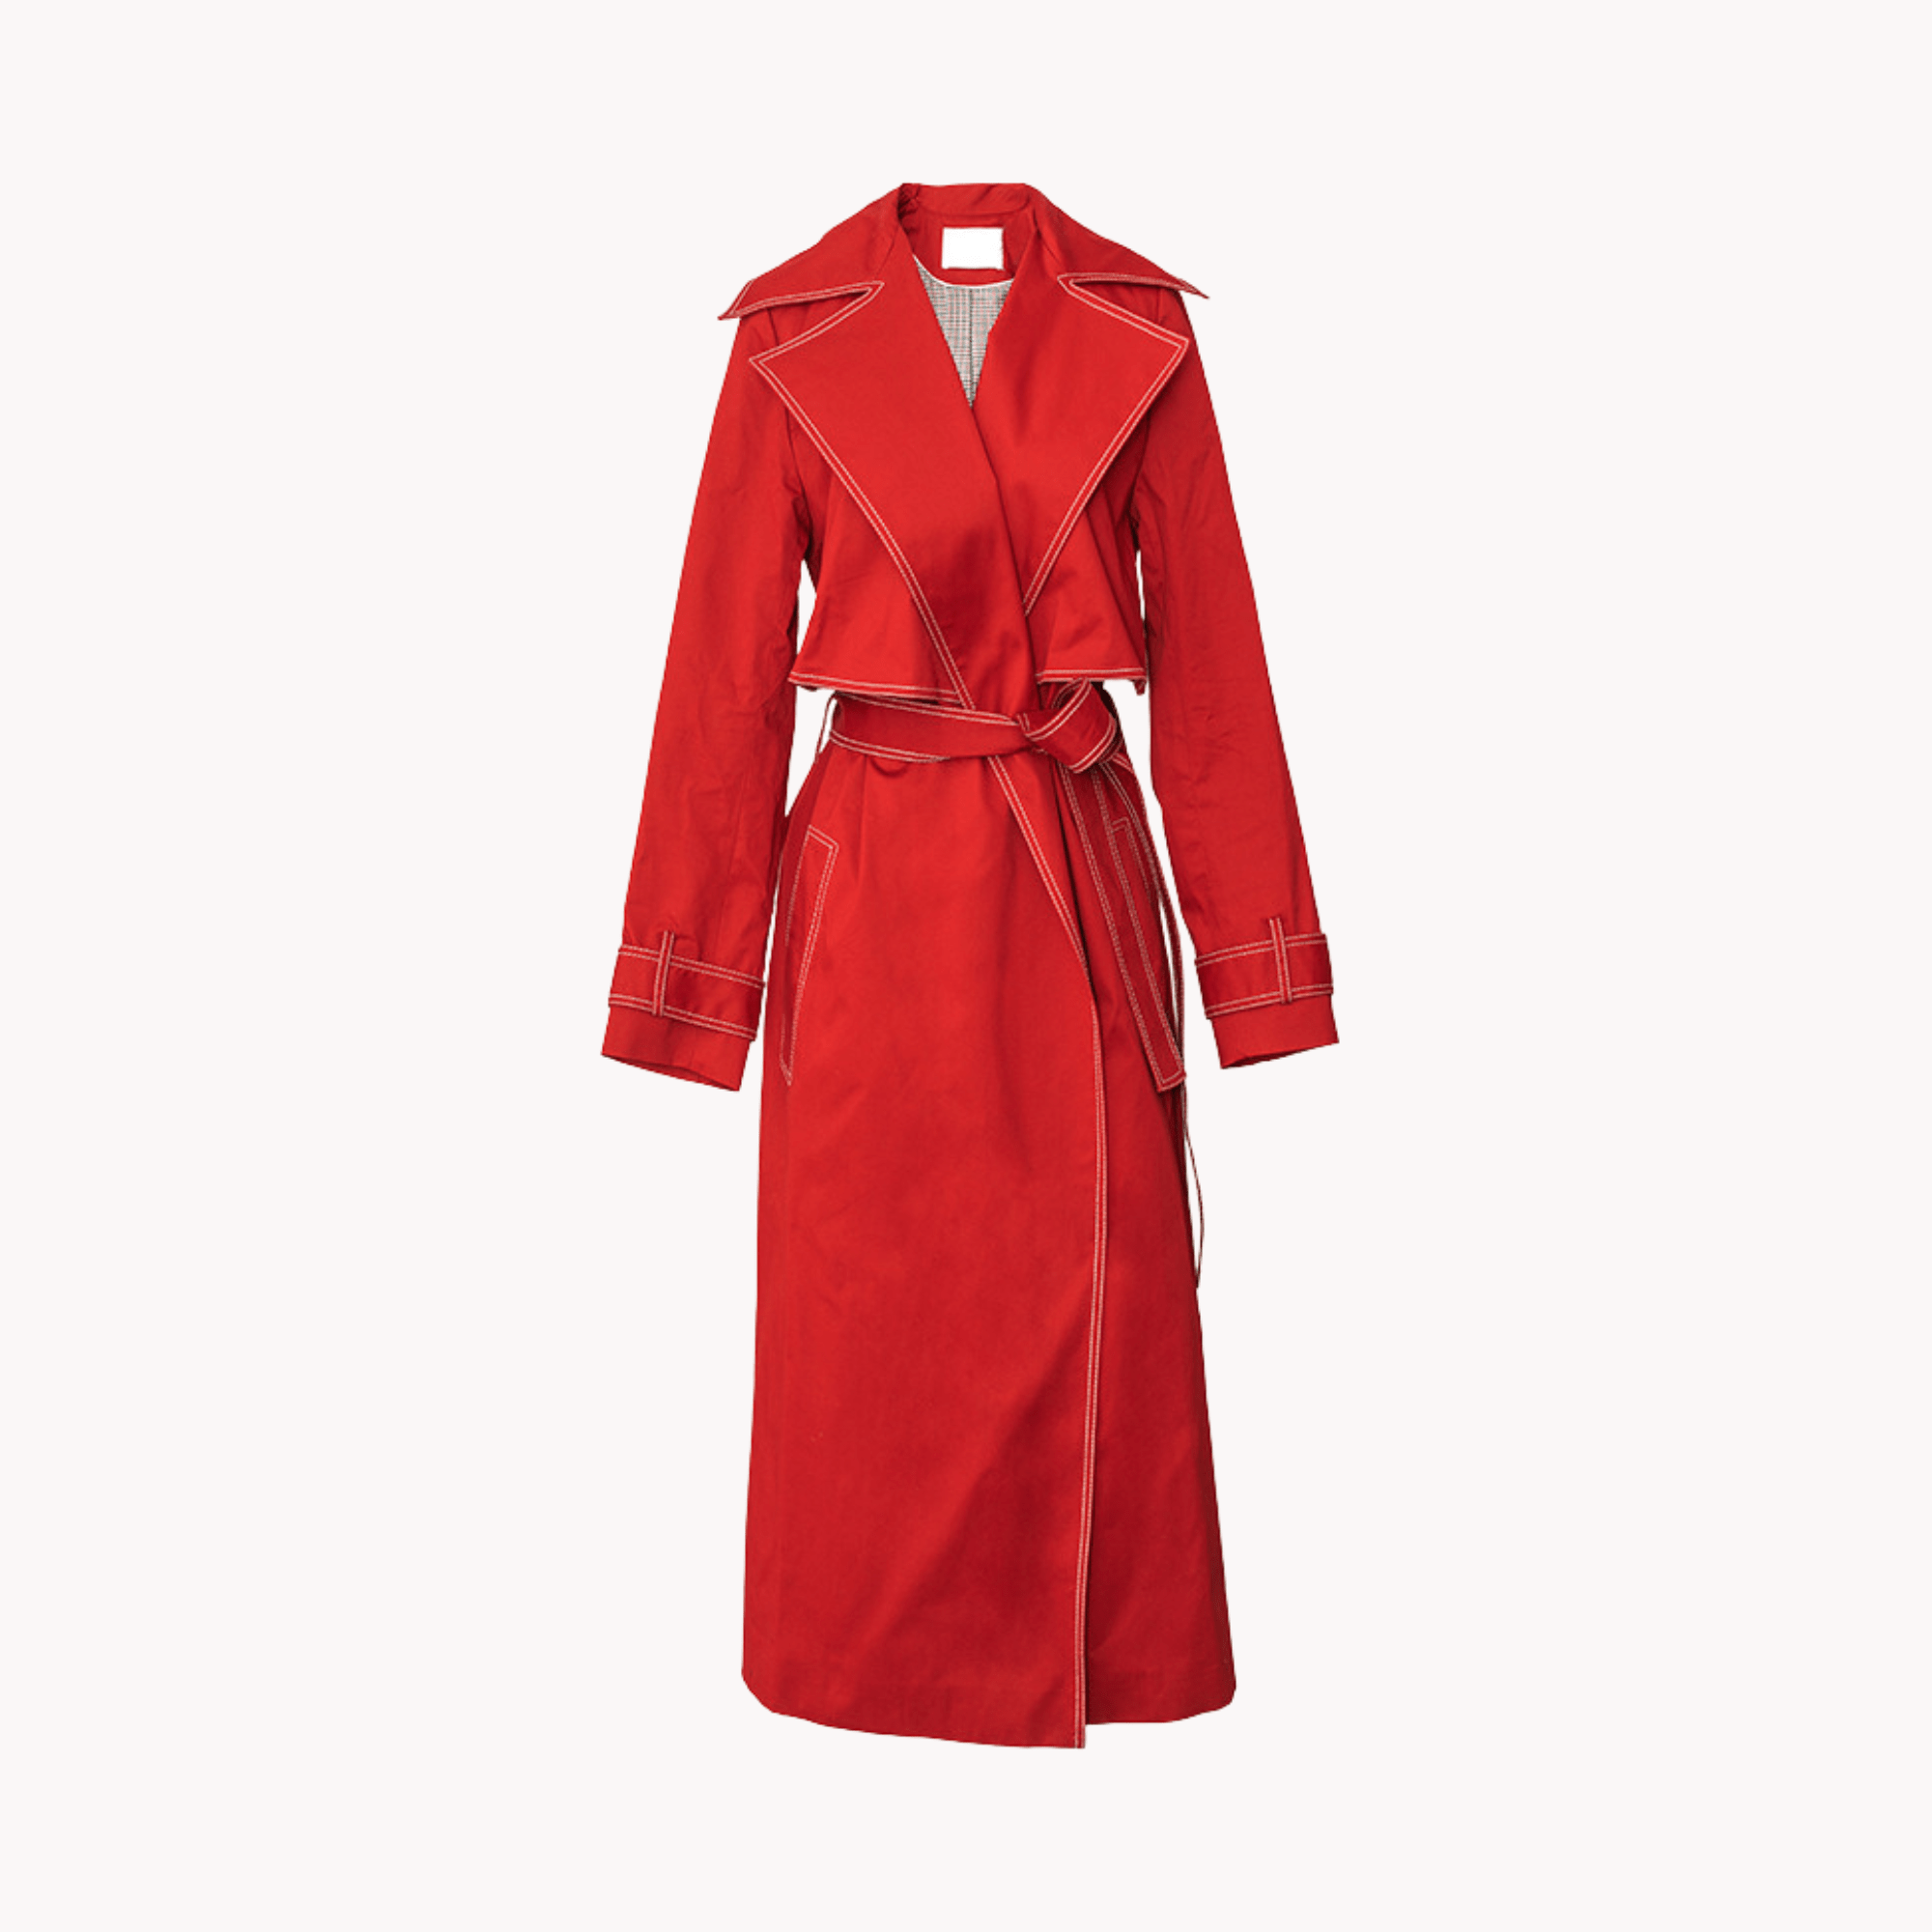 Lace-up Double Breasted Split Trench Coat - Kelly Obi New York